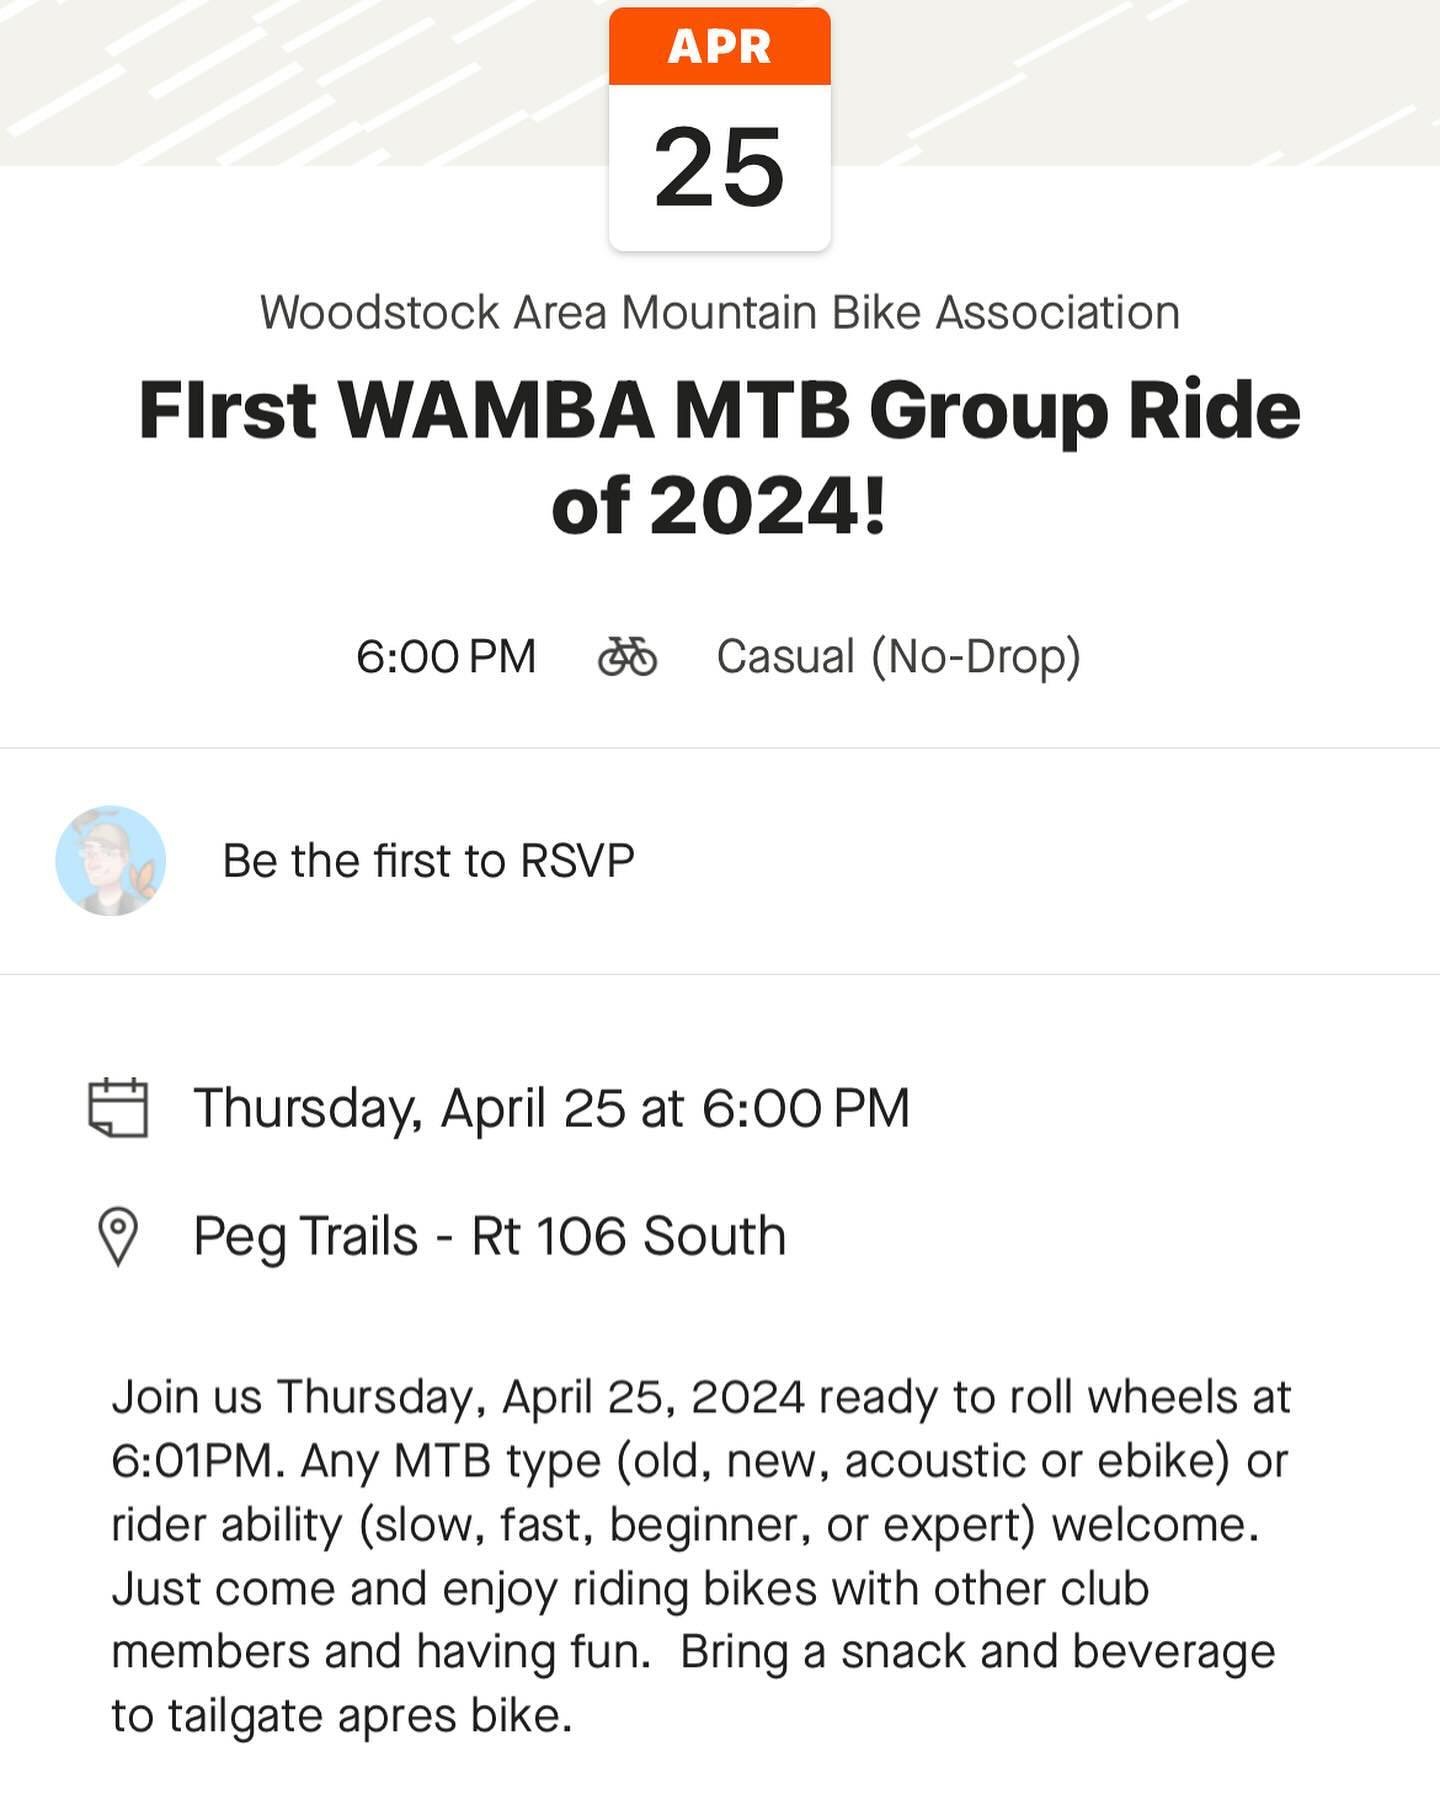 Join us Thursday, April 25, 2024 ready to roll wheels at 6:01PM. Any MTB type (old, new, acoustic or ebike) or rider ability (slow, fast, beginner, or expert) welcome. Just come and enjoy riding bikes with other club members and having fun. Bring a s